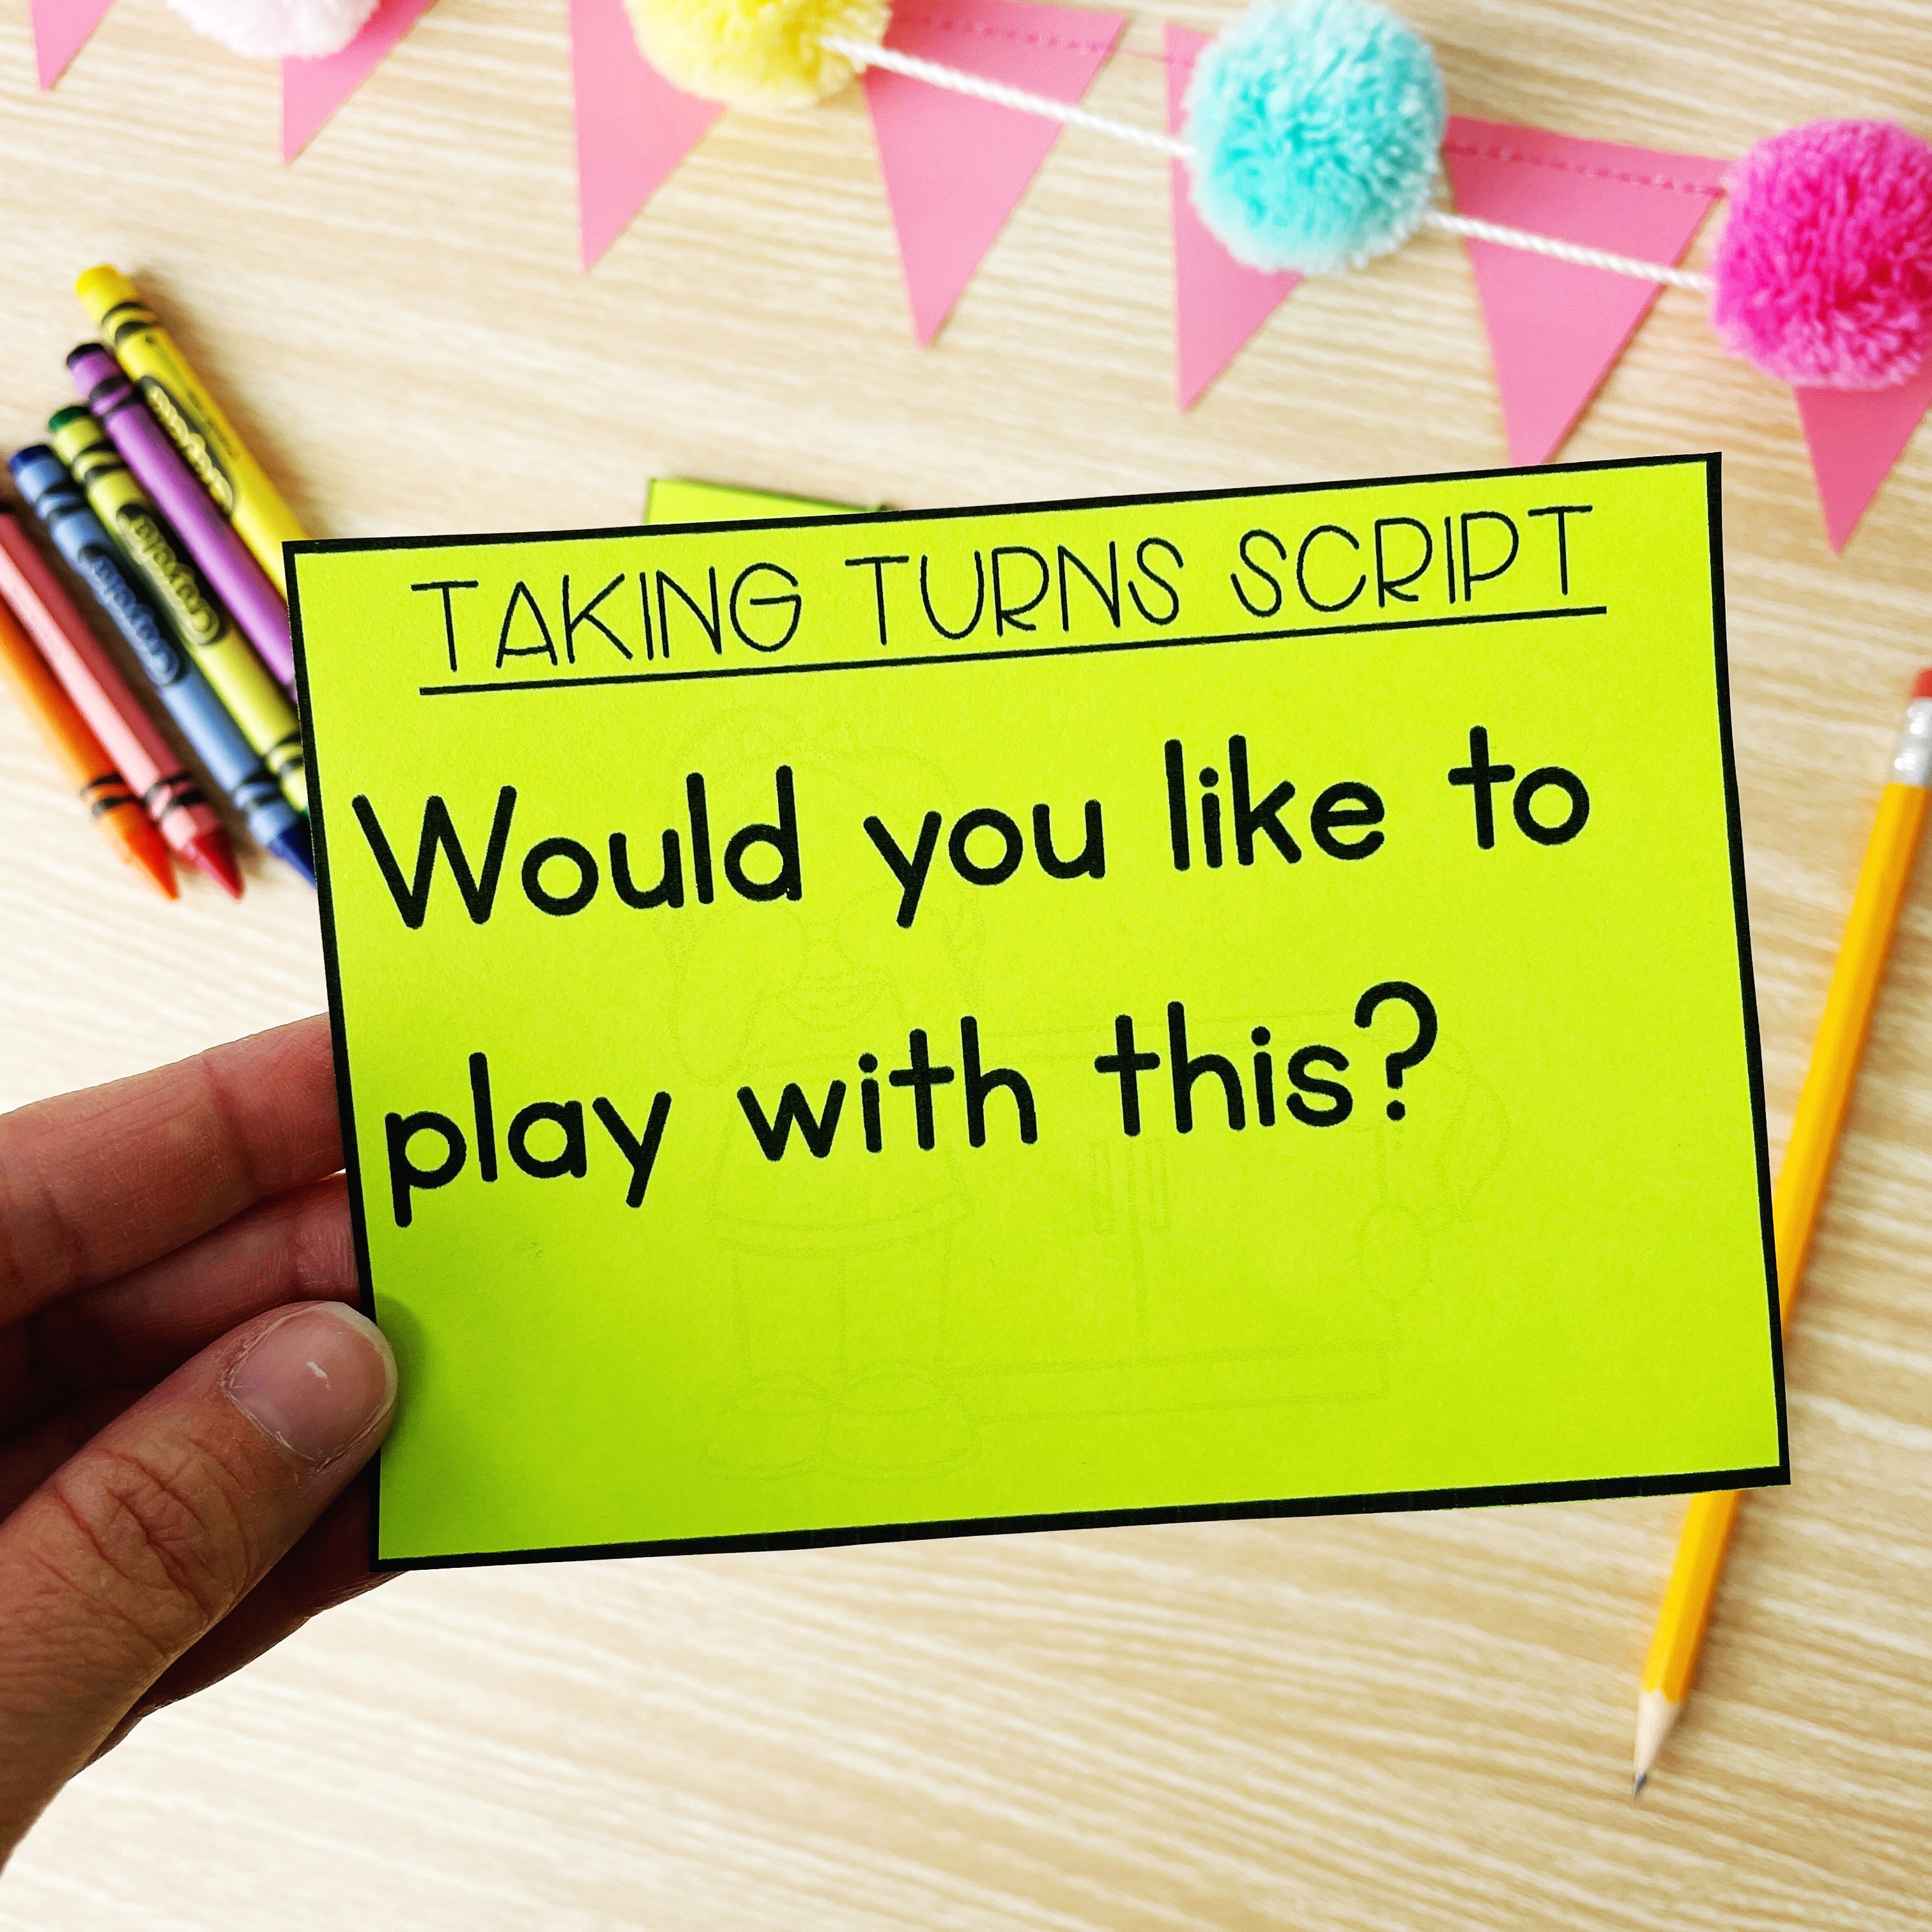 Role Play Scenario Task Cards for Social-Emotional SEL Lessons